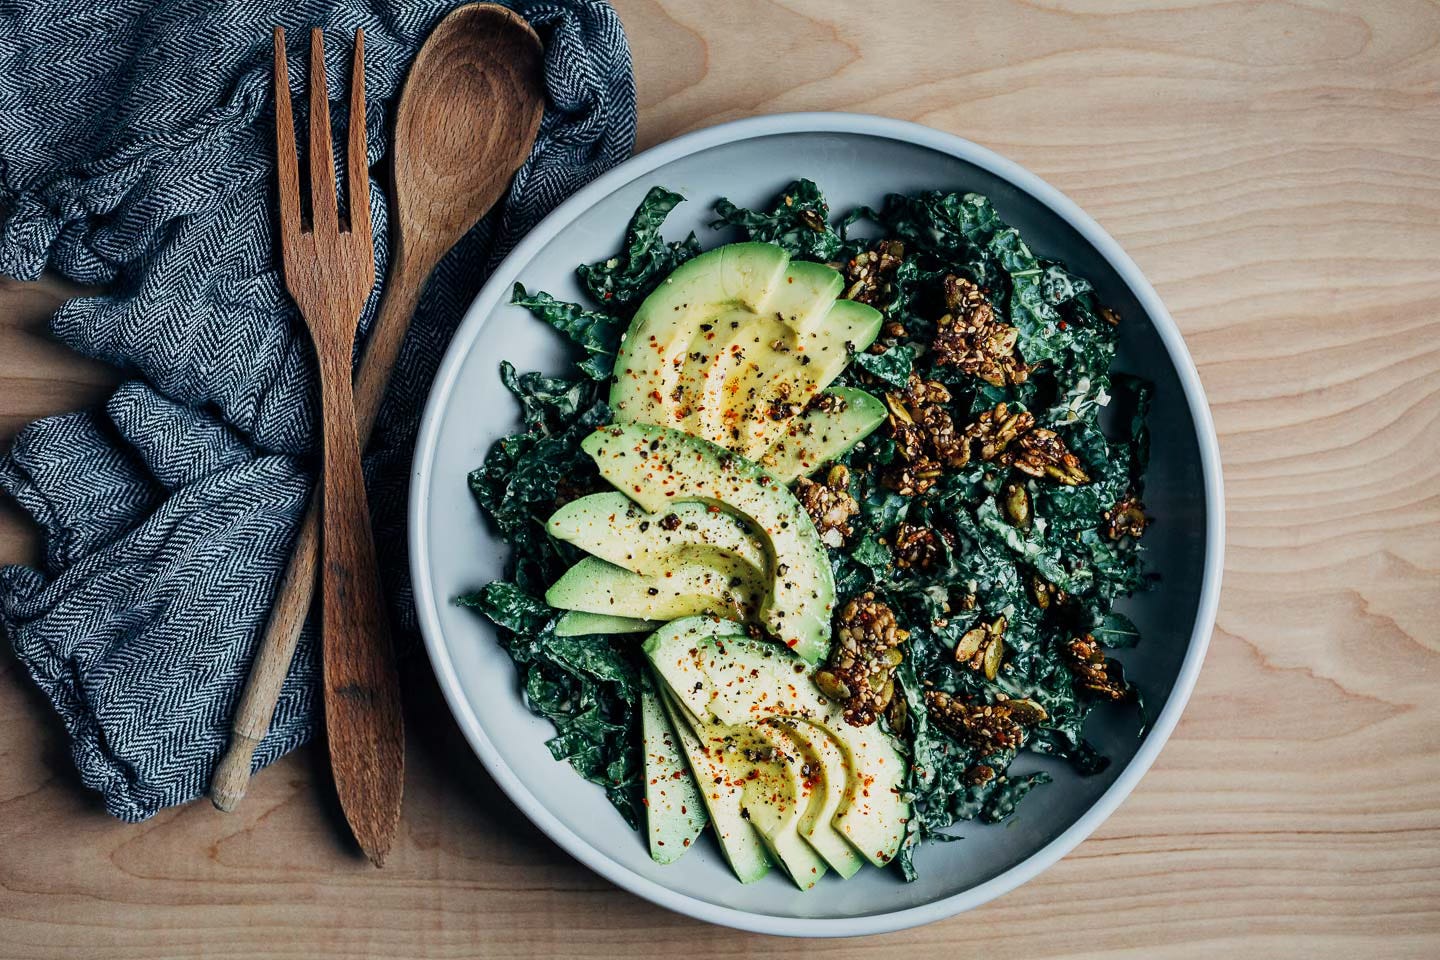 A bowl of kale and avocado salad with serving utensils and a napkin alongside